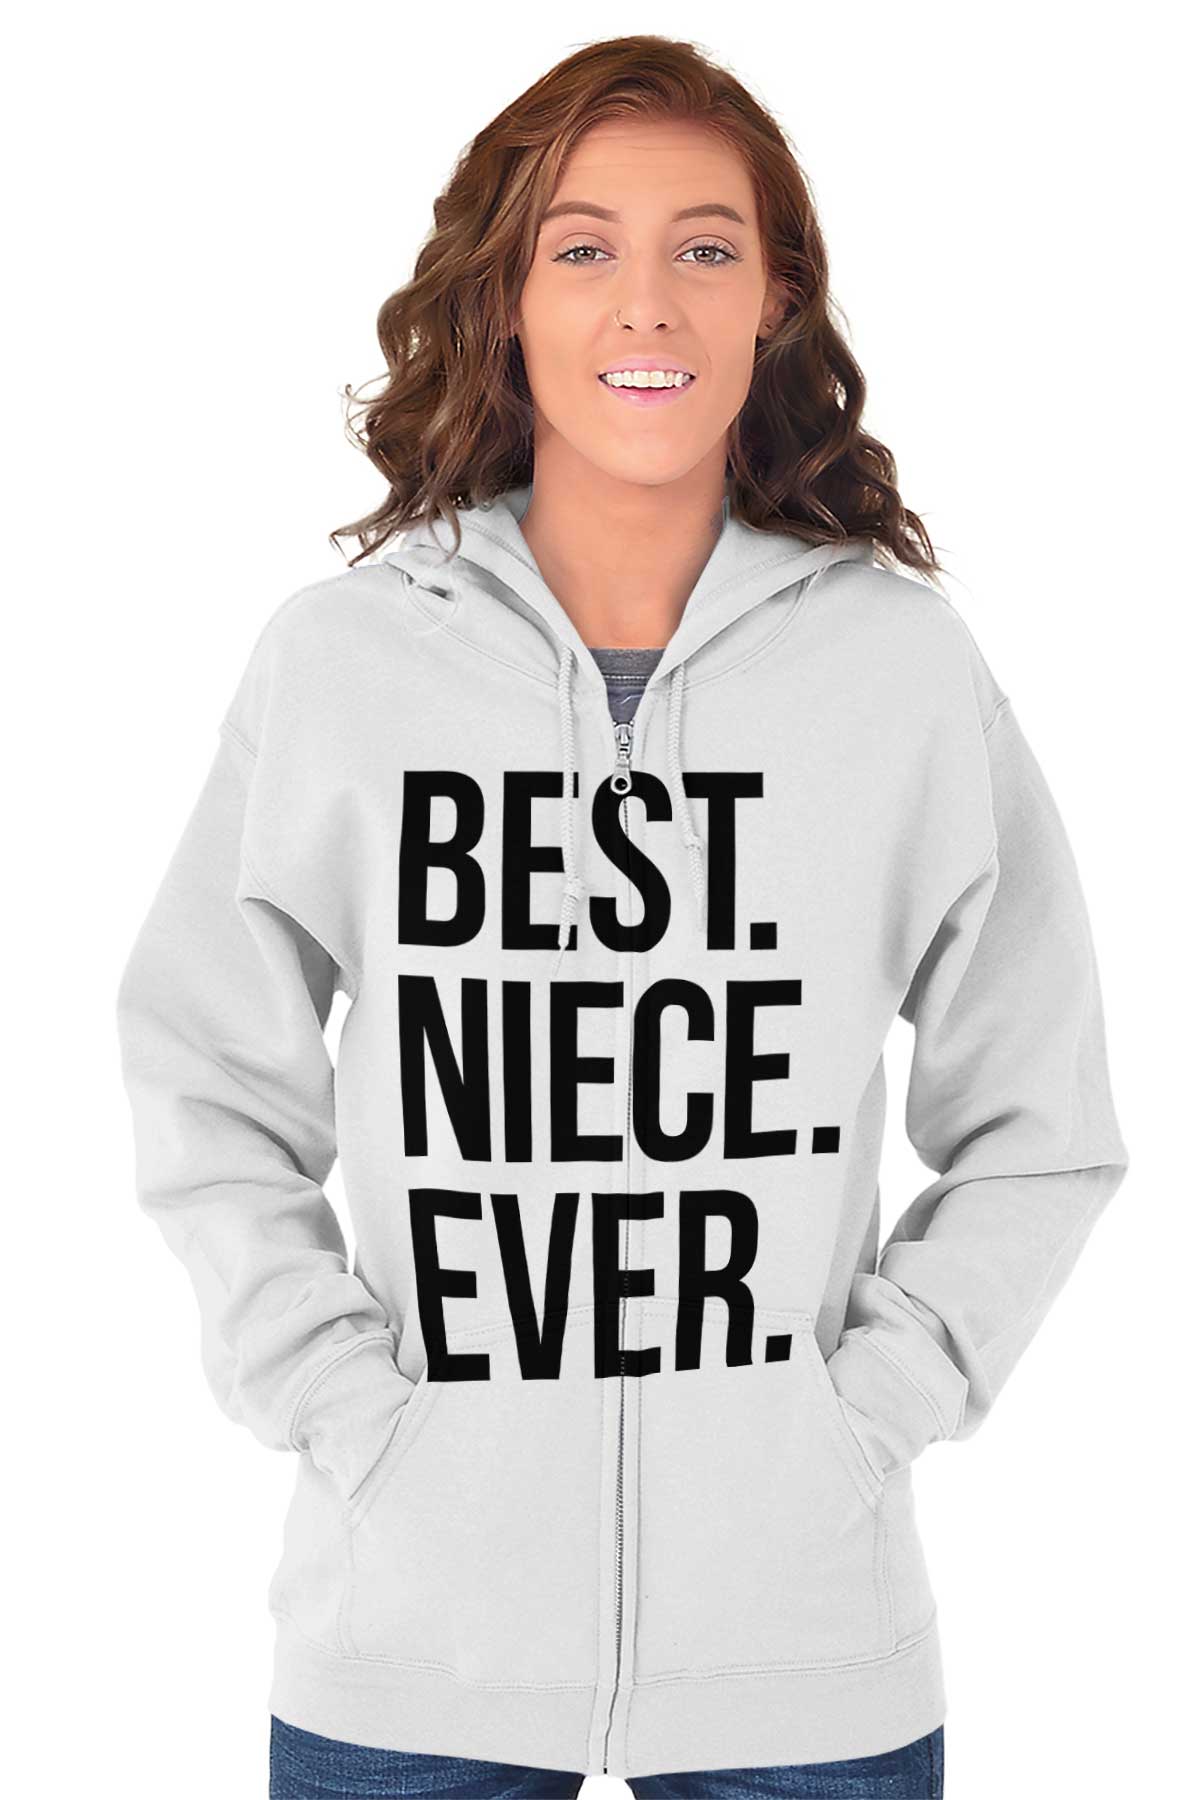 Best Relative Ever Womens Zipper Hoodies Sweat Shirts Best Niece Ever Family Relative Aunt Uncle - image 2 of 2